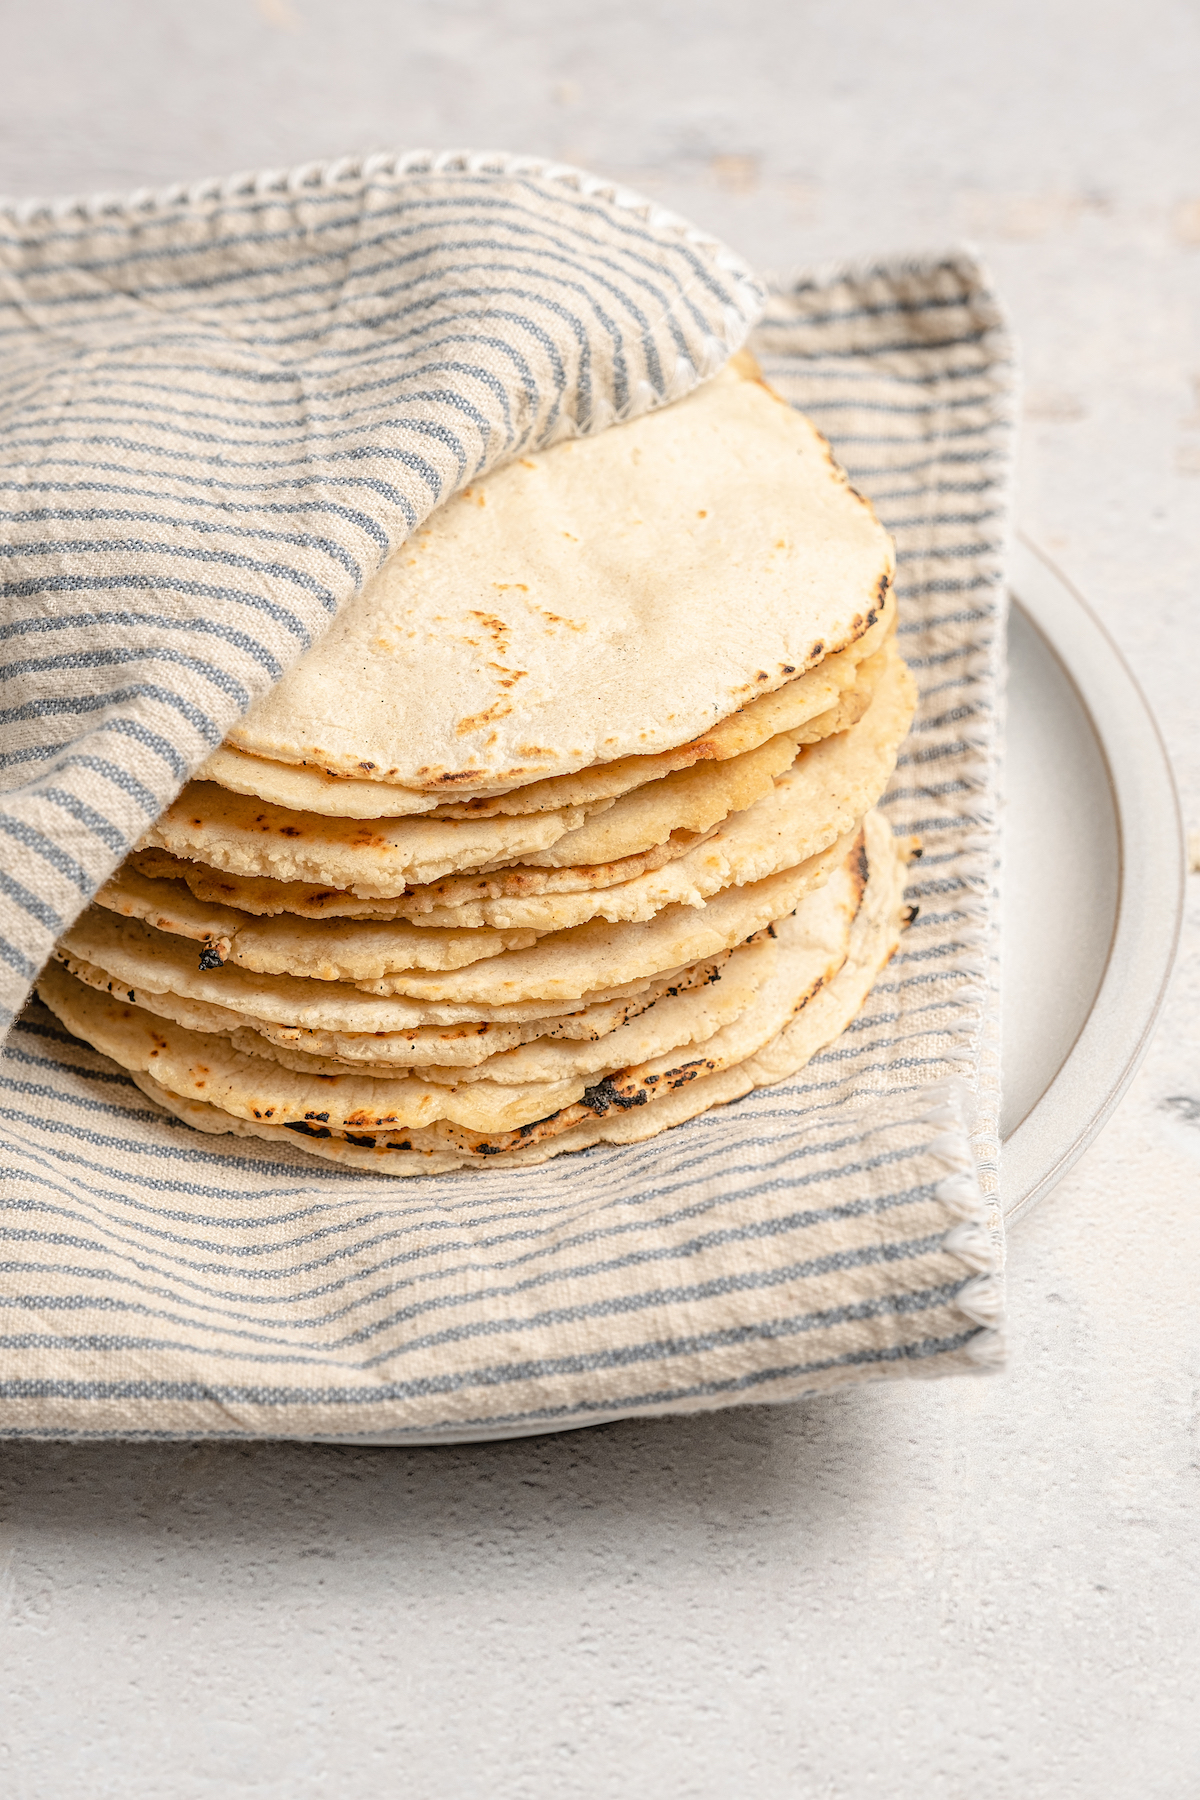 Stack of authentic corn tortilla recipe in a kitchen towel.